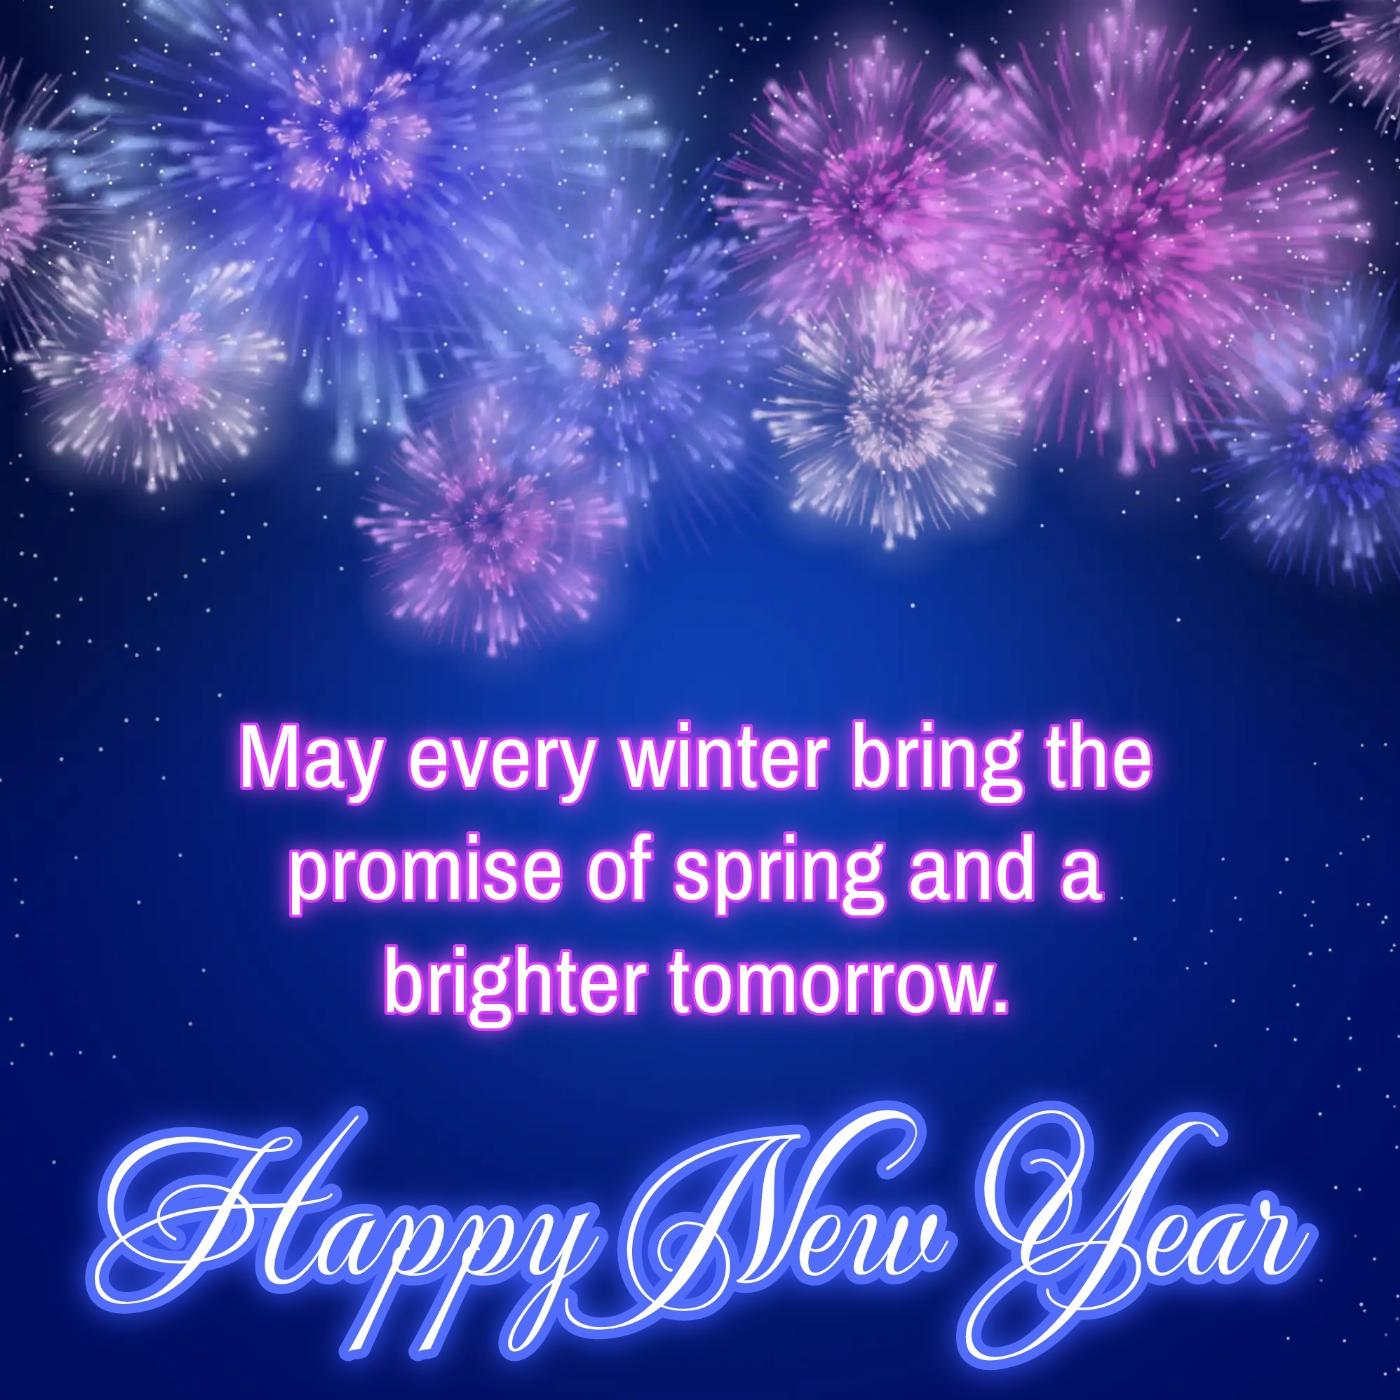 May every winter bring the promise of spring and a brighter tomorrow